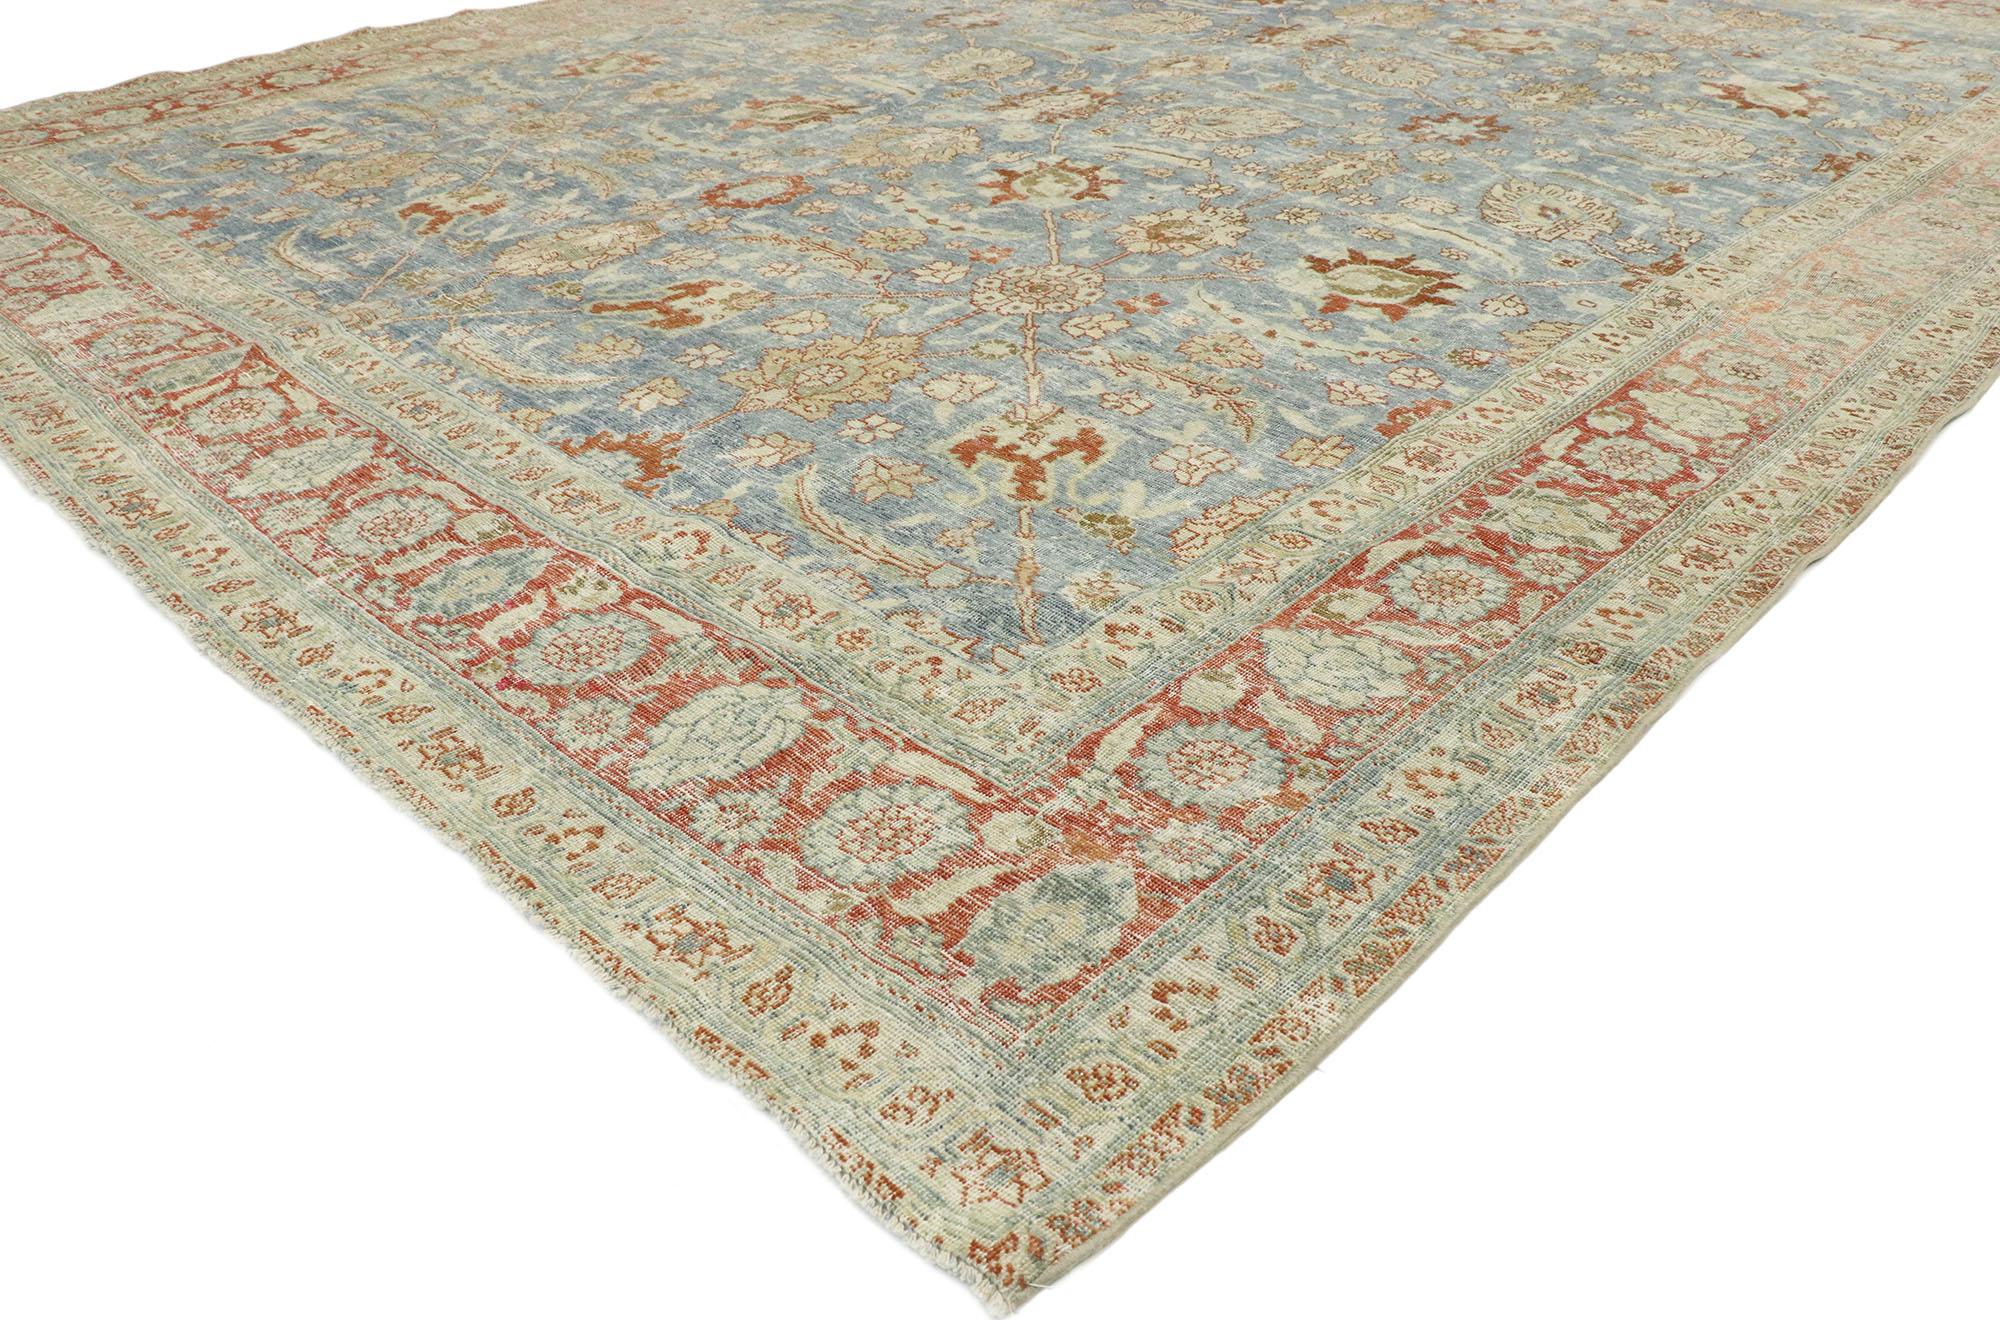 53174 Distressed Antique Persian Tabriz Rug, 08'10 x 11'09. Antique-washed distressed Persian Tabriz rugs are a type of rug that undergoes a special treatment process to give them an aged and weathered appearance, resembling antique rugs. They are